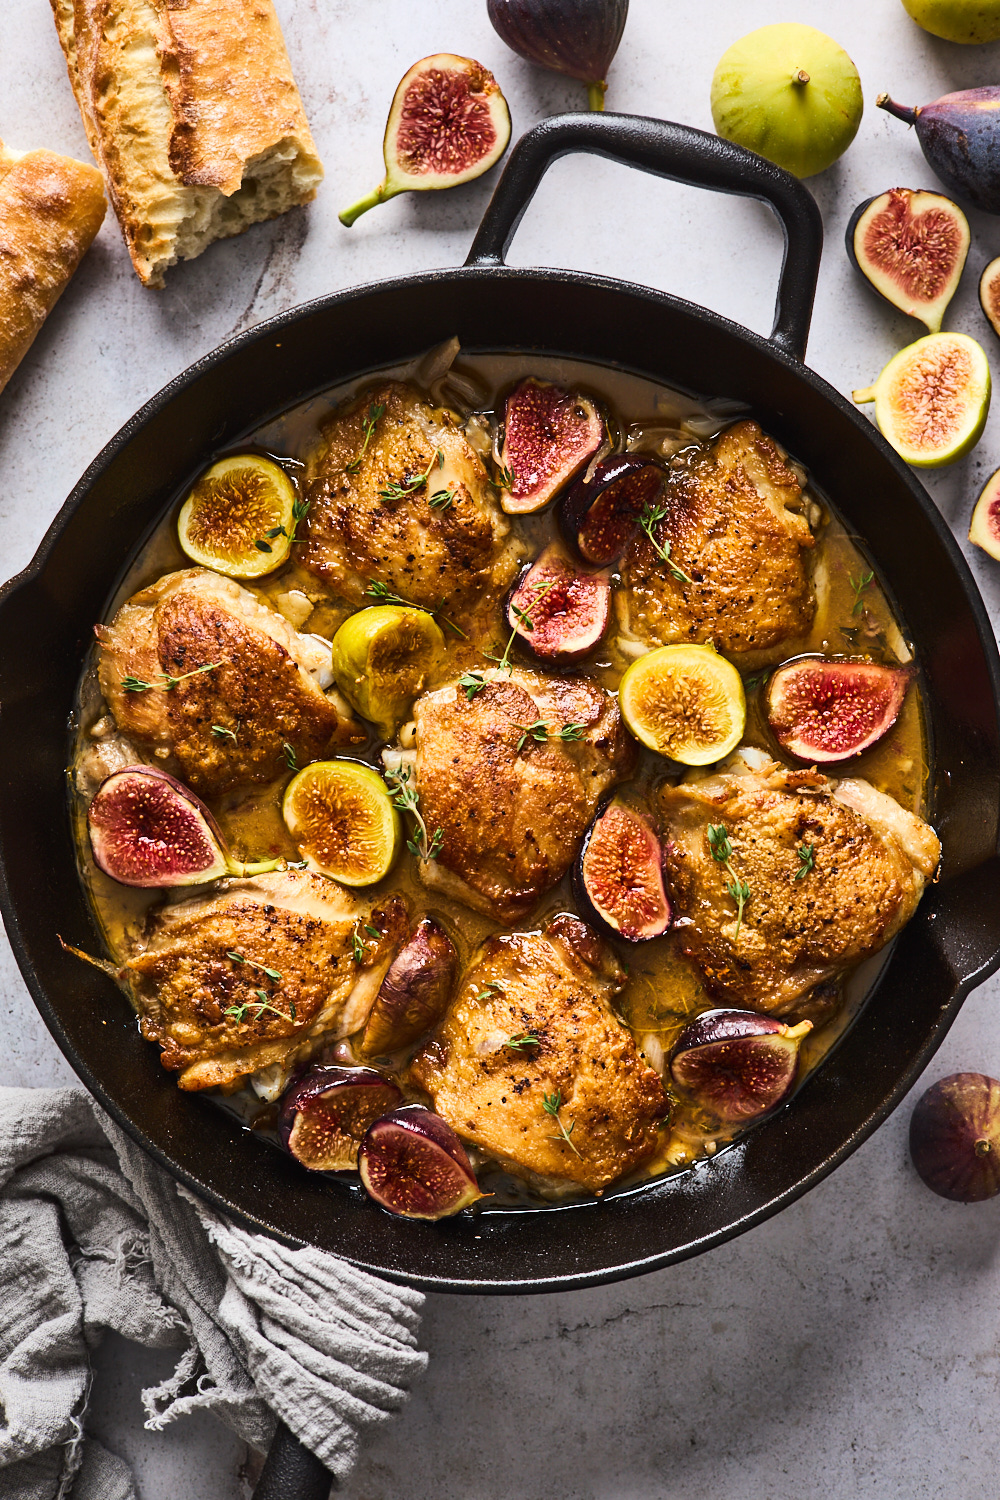 Skillet Balsamic Chicken With California Figs